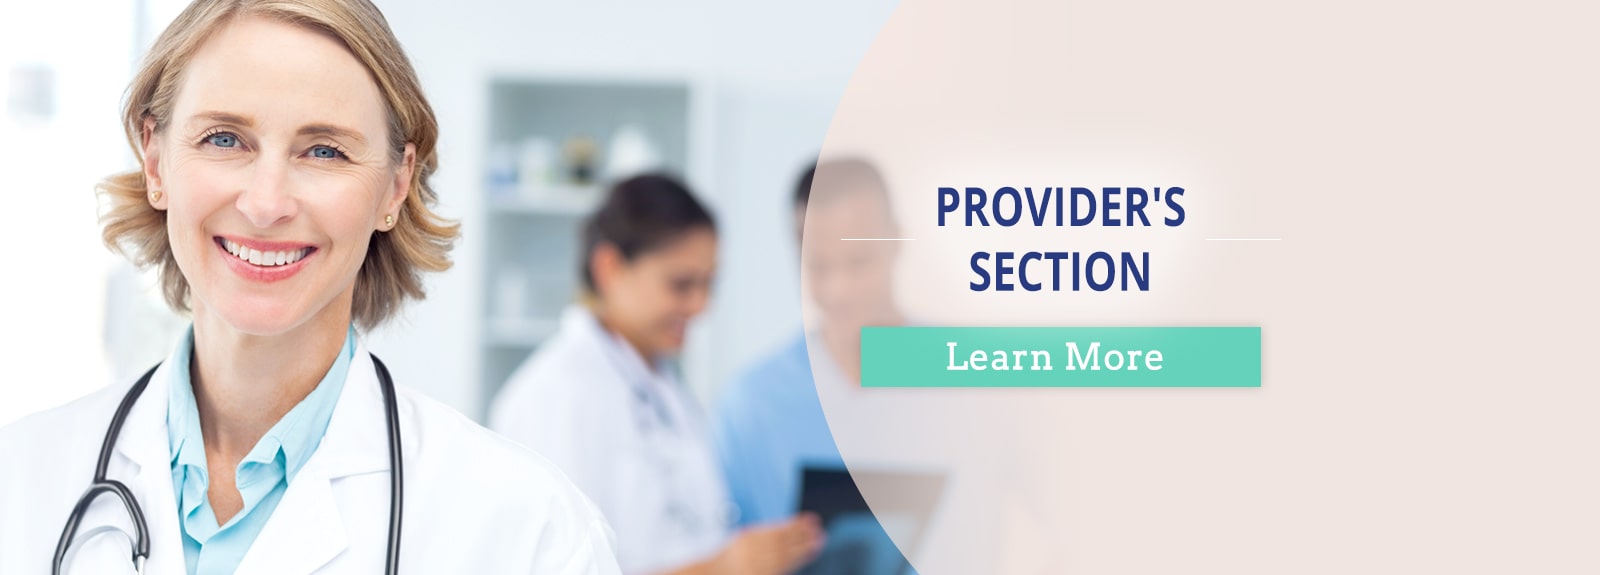 Providers's Section. Learn More.